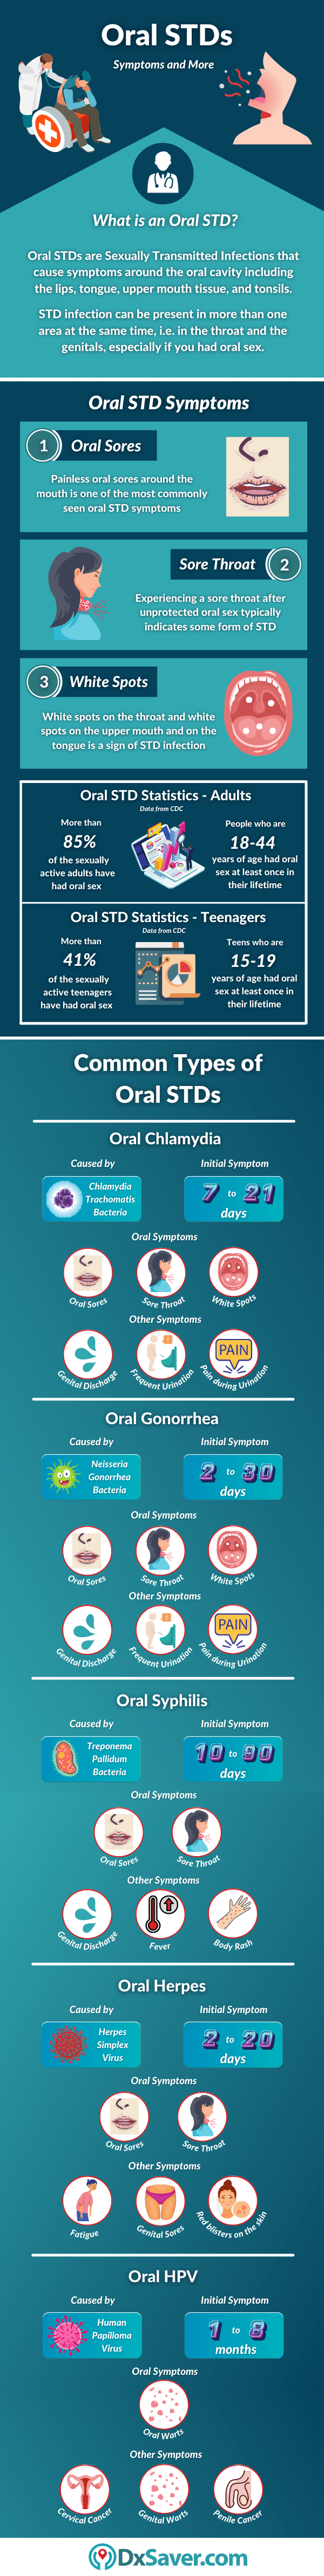 Signs and Symptoms of STDs in mouth and causes of oral sores and white spots